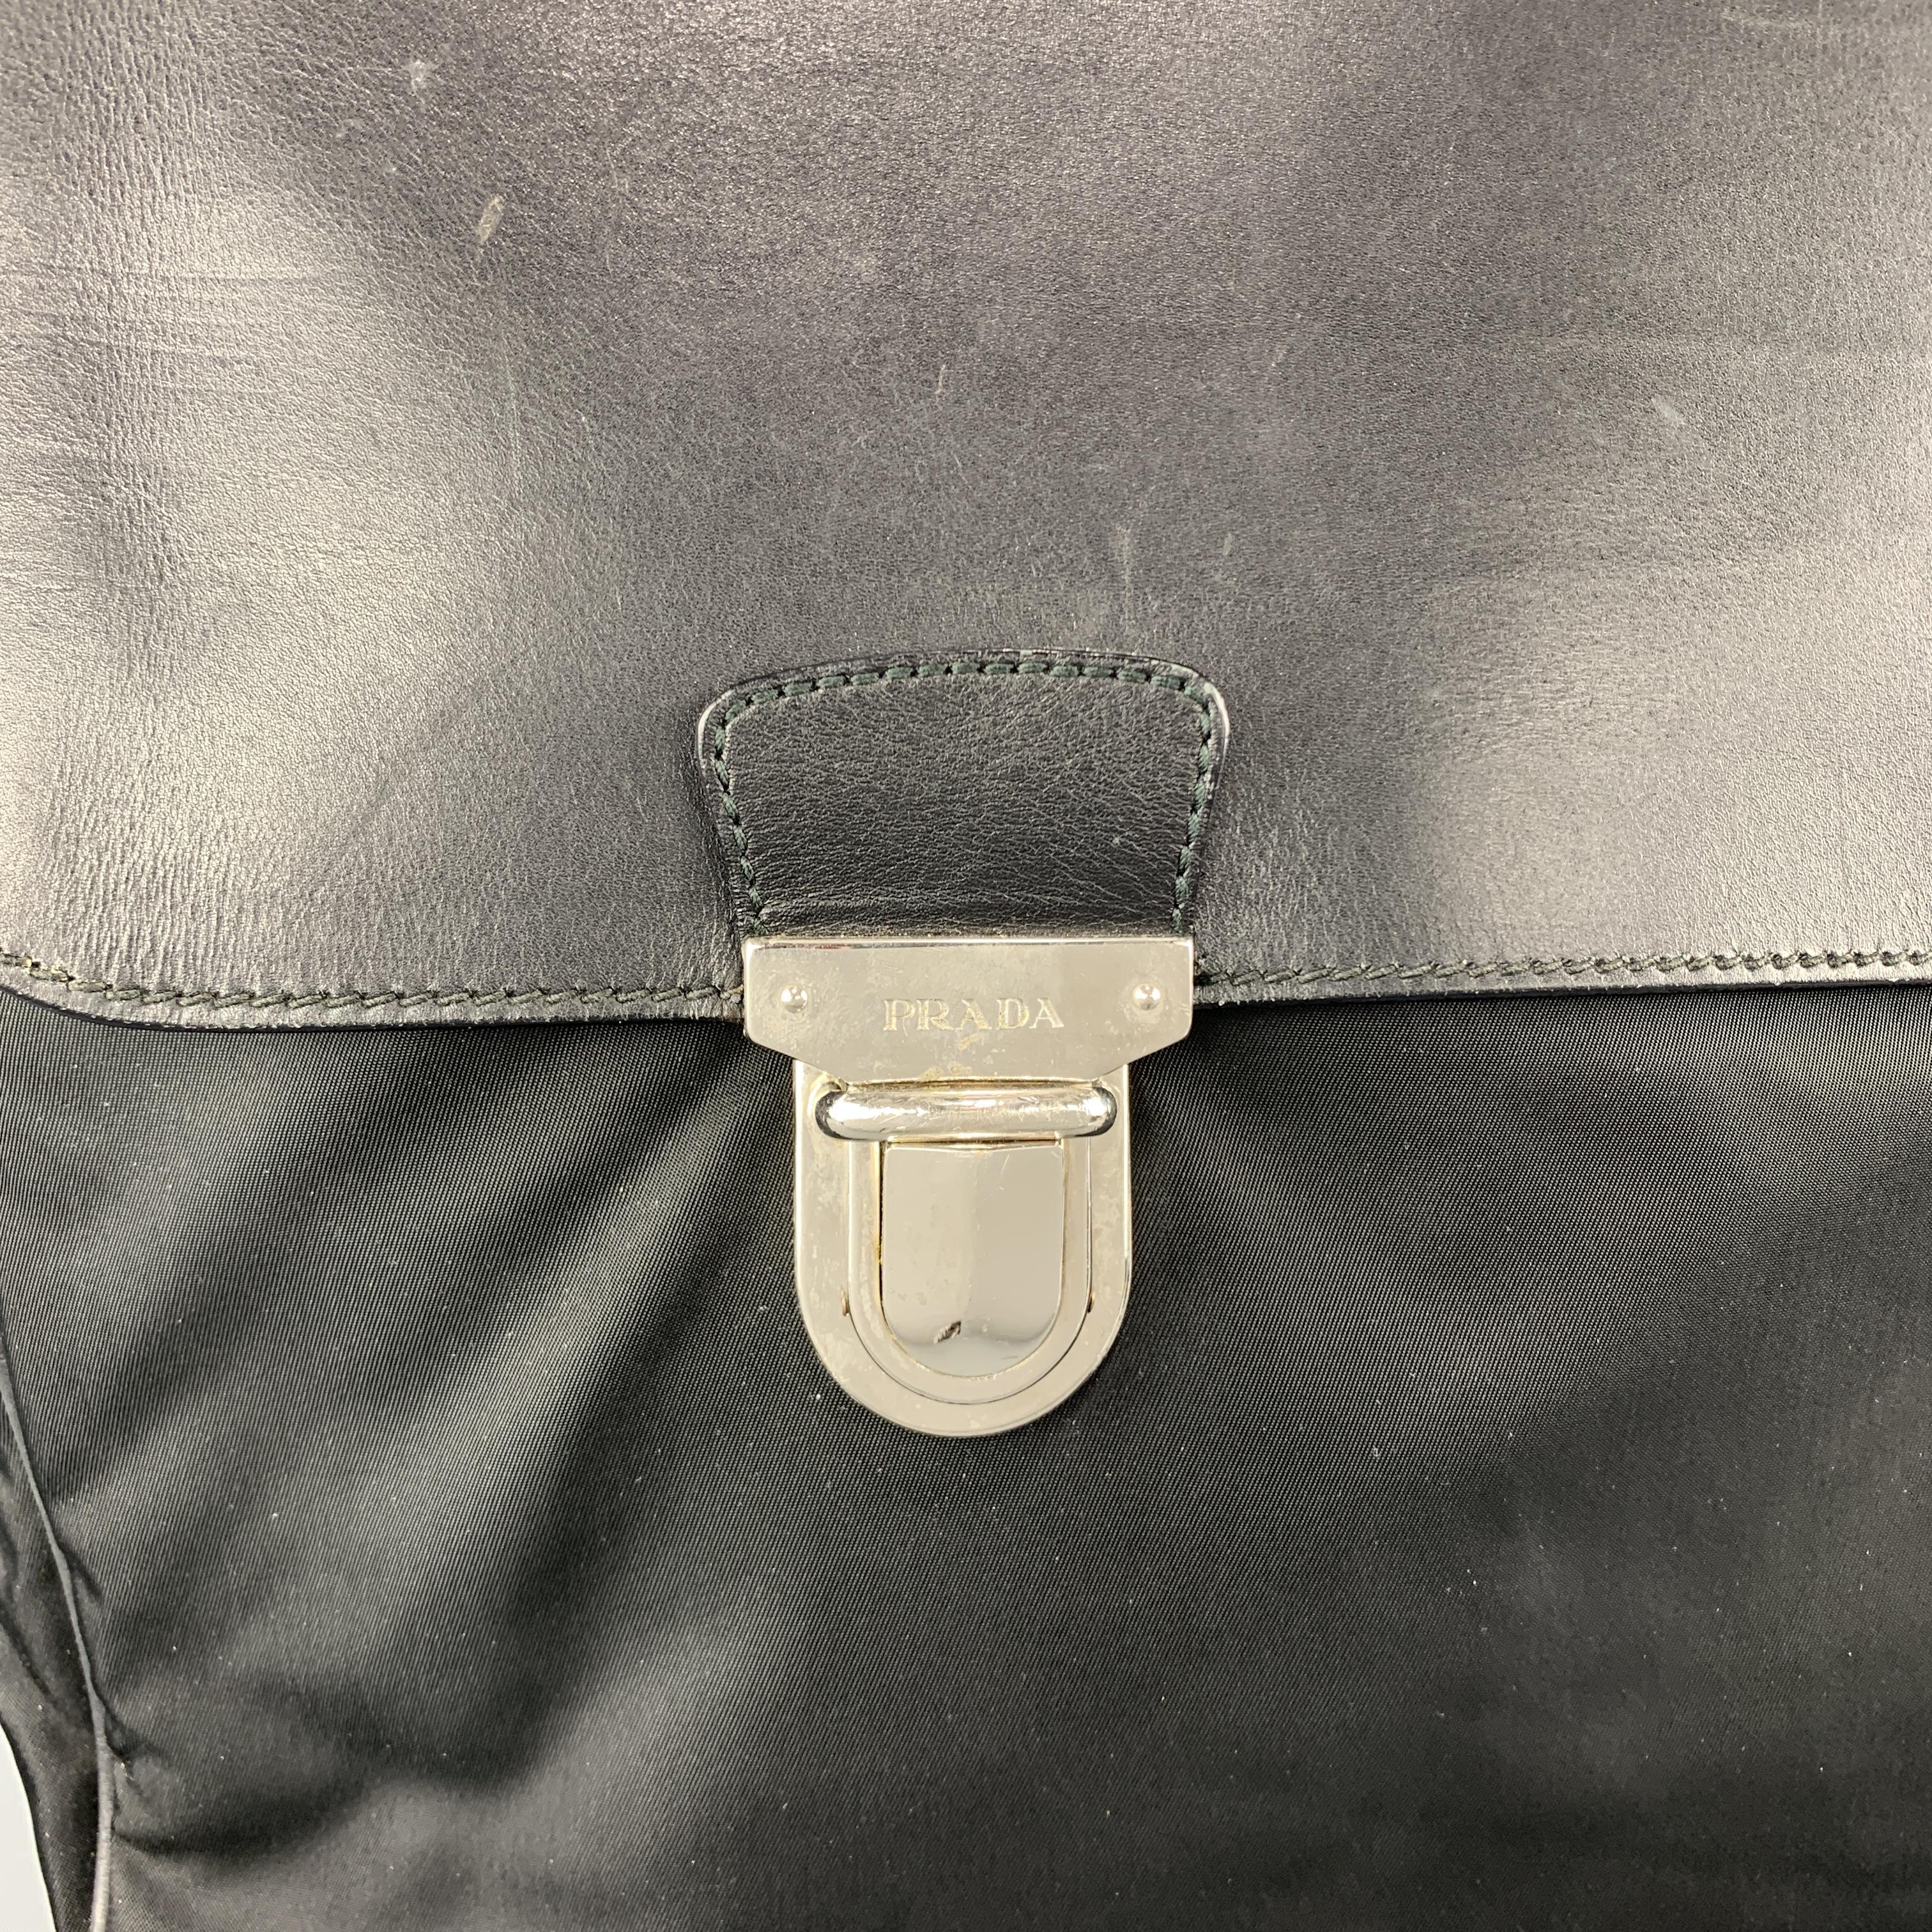 Vintage PRADA briefcase comes in nylon twill with two zip compartments, leather piping, and leather flap with double silver tone engraved snap closures and top handle. Wear throughout. As-is. Made in Italy.

Good Pre-Owned